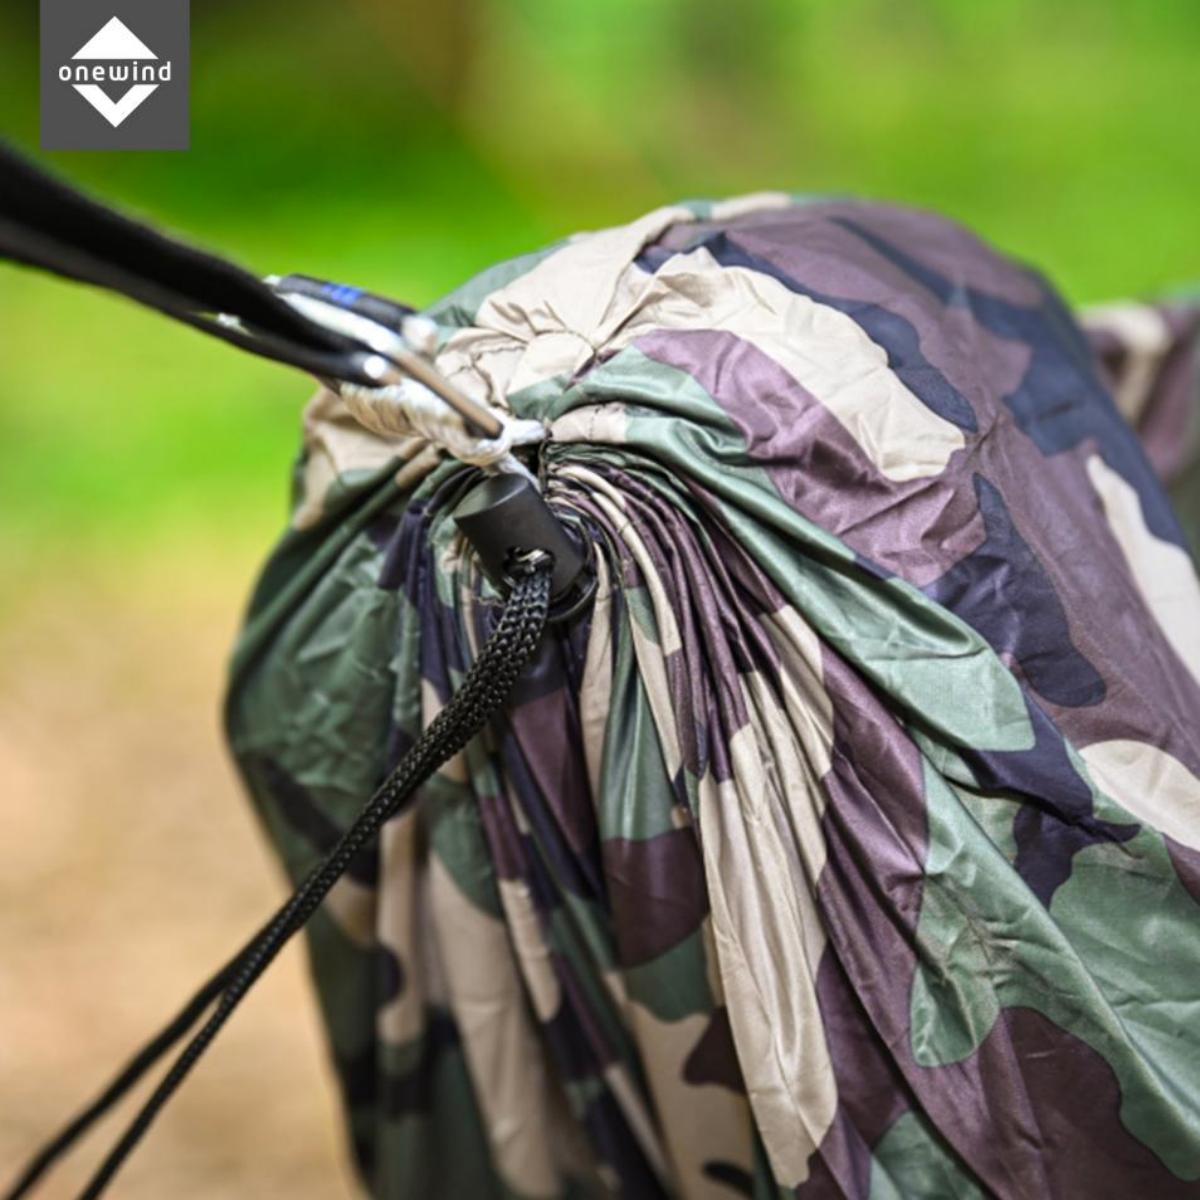 Camouflage Camping | Onewind Outdoors